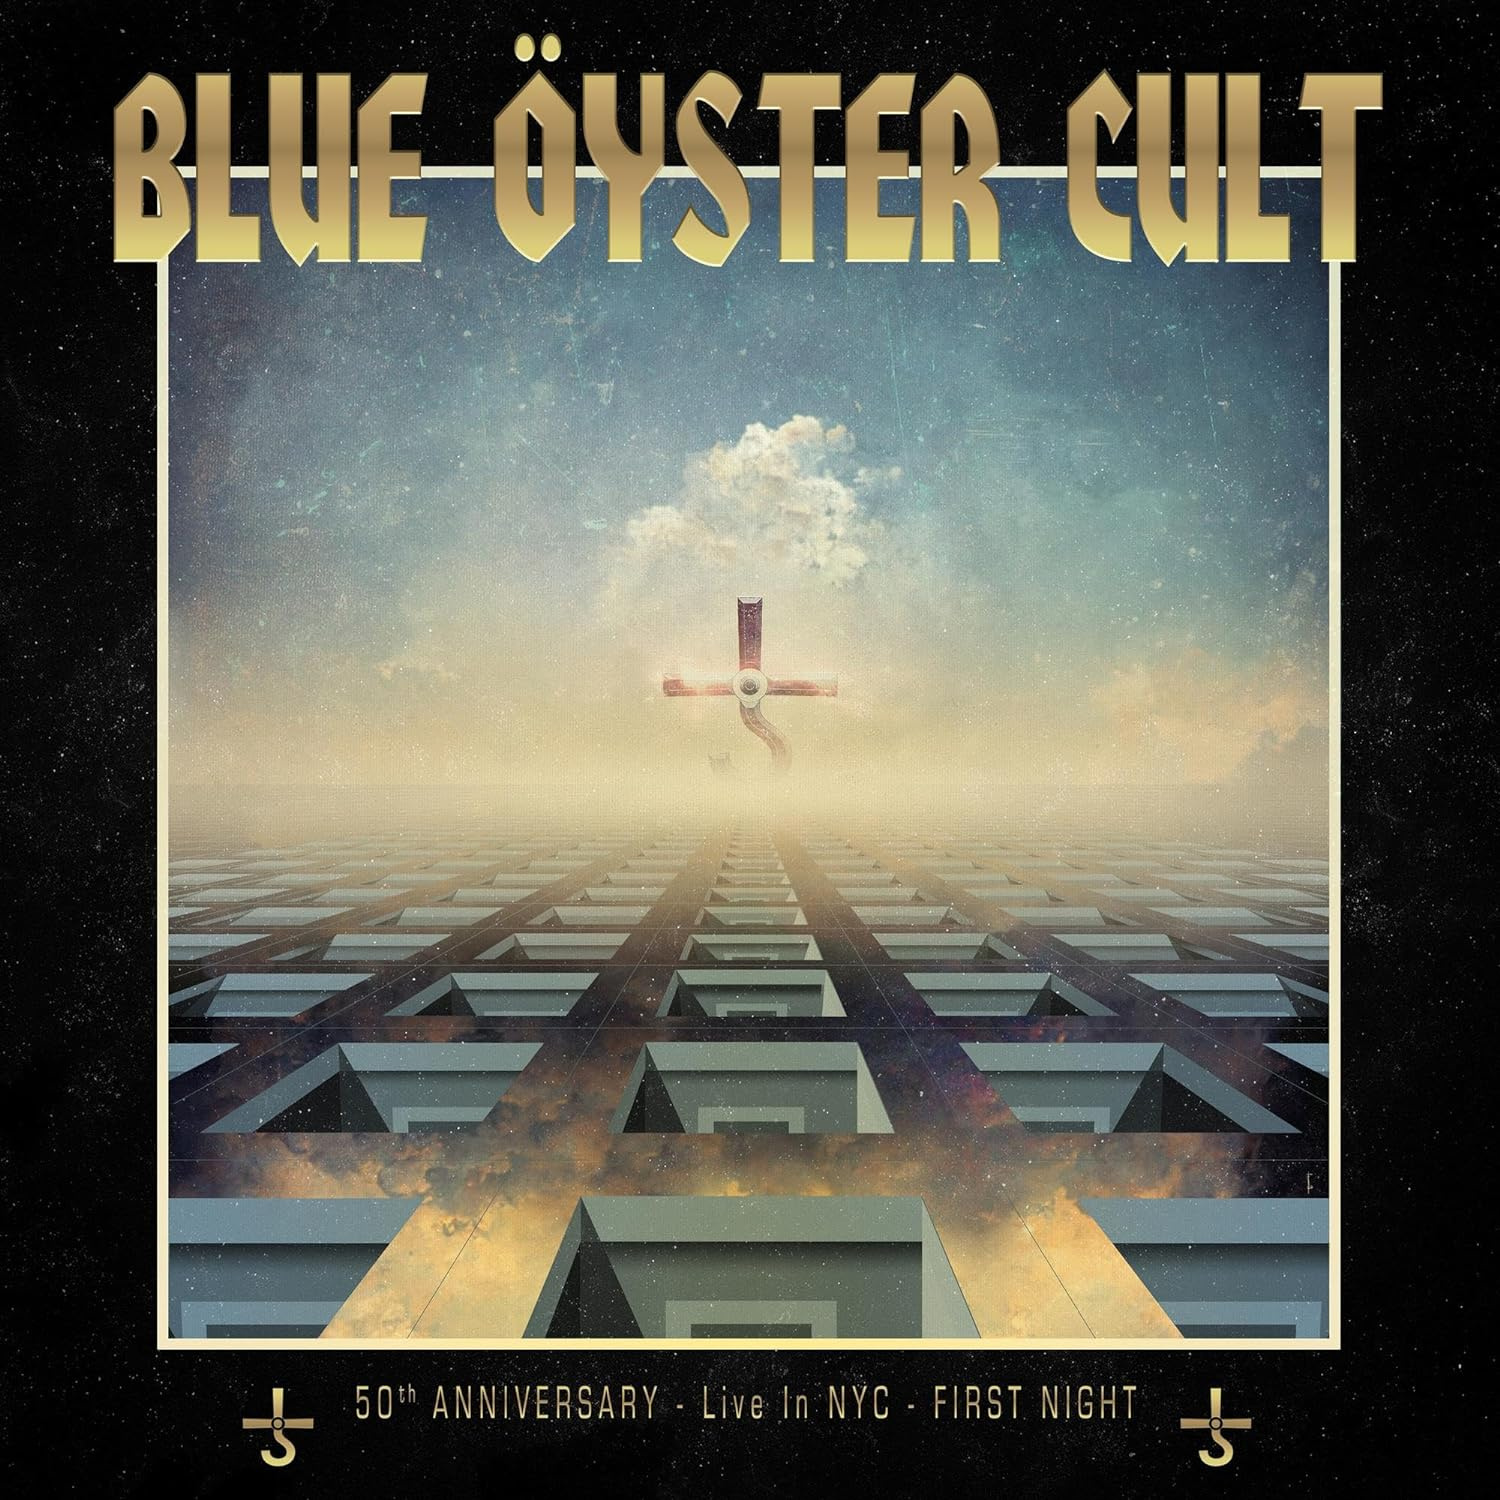 Blue Oyster Cult - 50th Anniversary Live - First Night vinyl cover